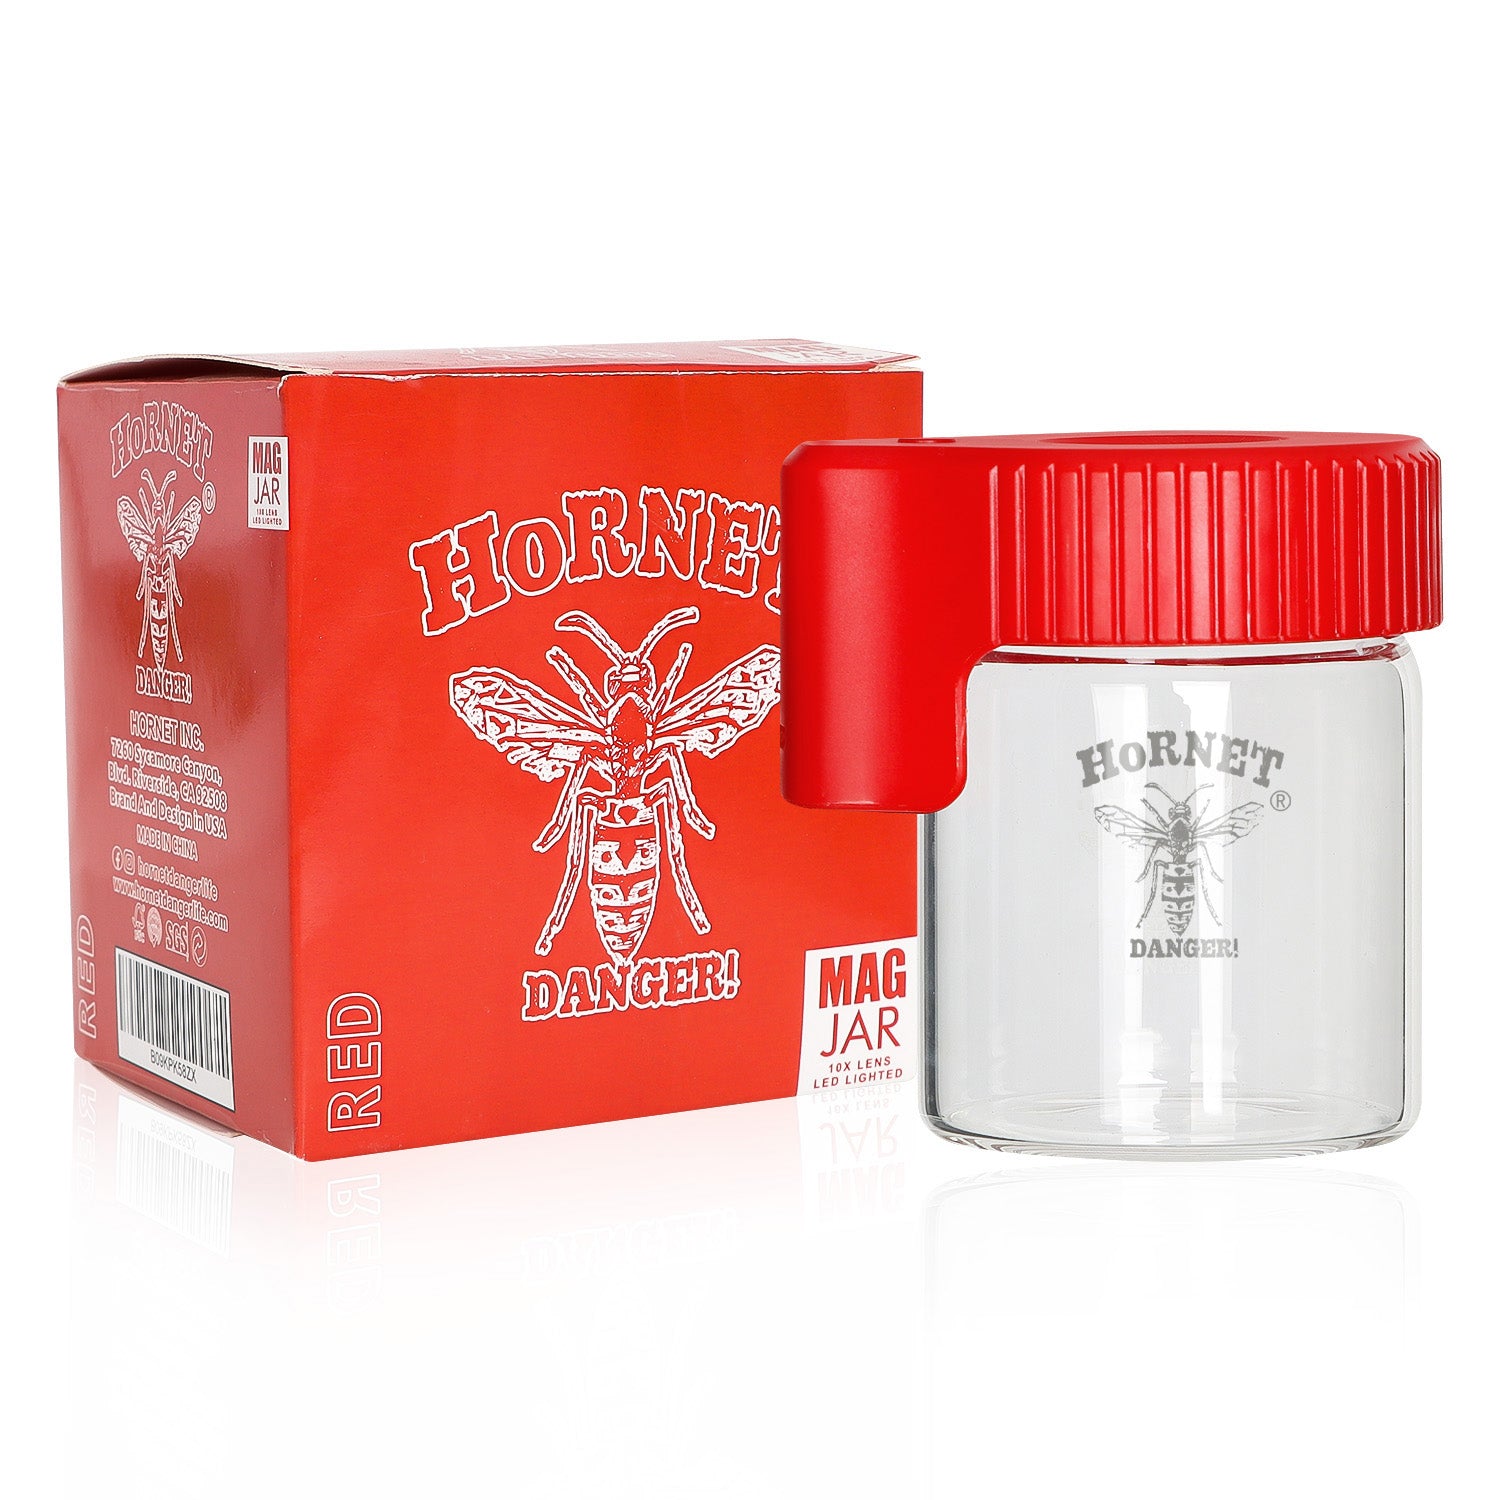 HORNET Light-Up Led Glass Storage Jar, Air Tight & Magnifying View Jar, Red Color Jar Lid, Rechargeable Glass Jar